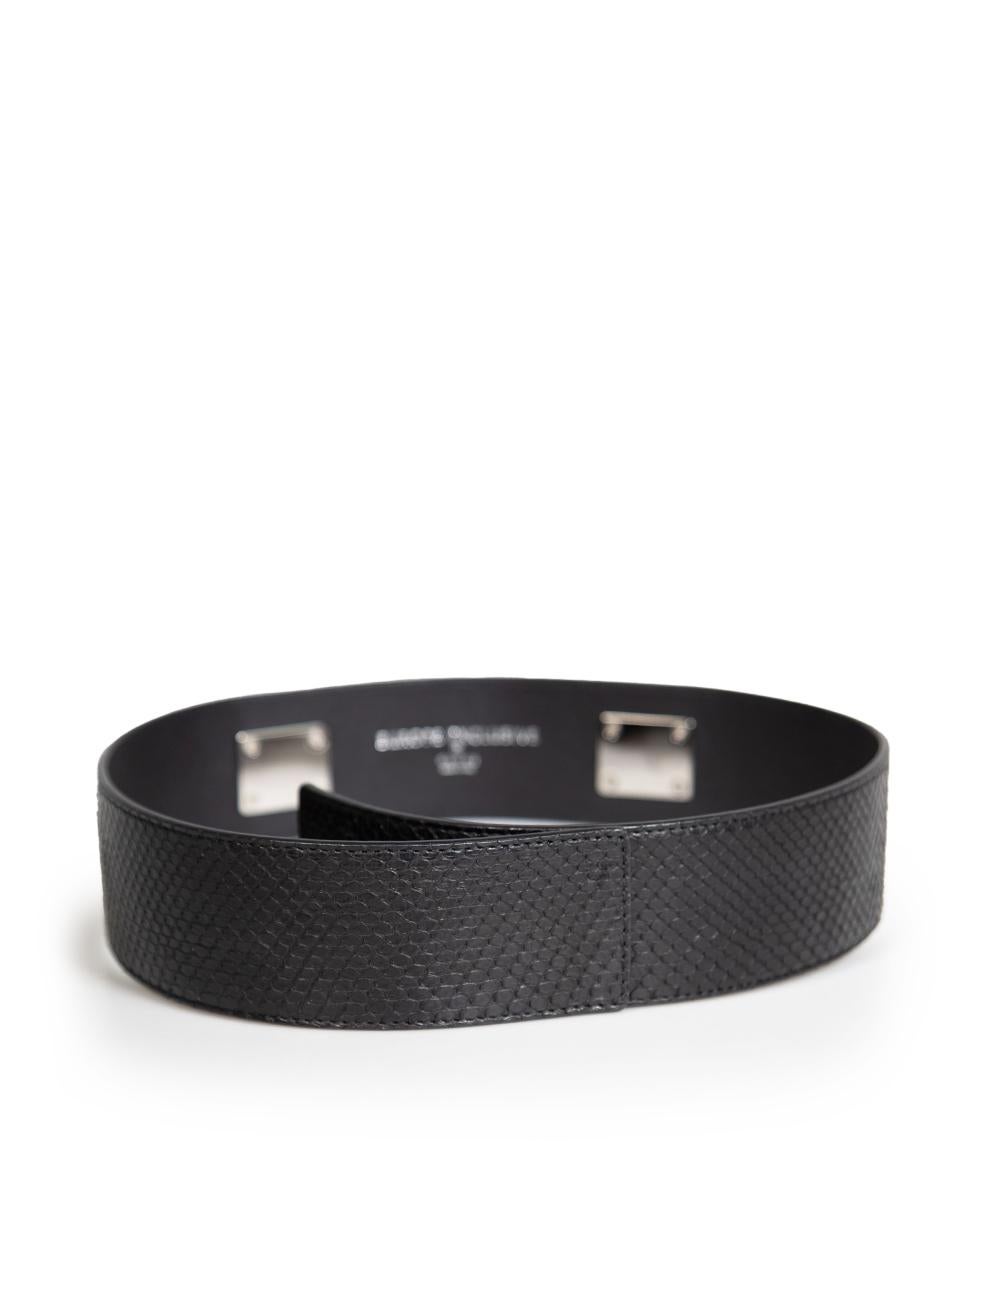 Gucci Black Snakeskin Horsebit Accent Belt In Excellent Condition For Sale In London, GB